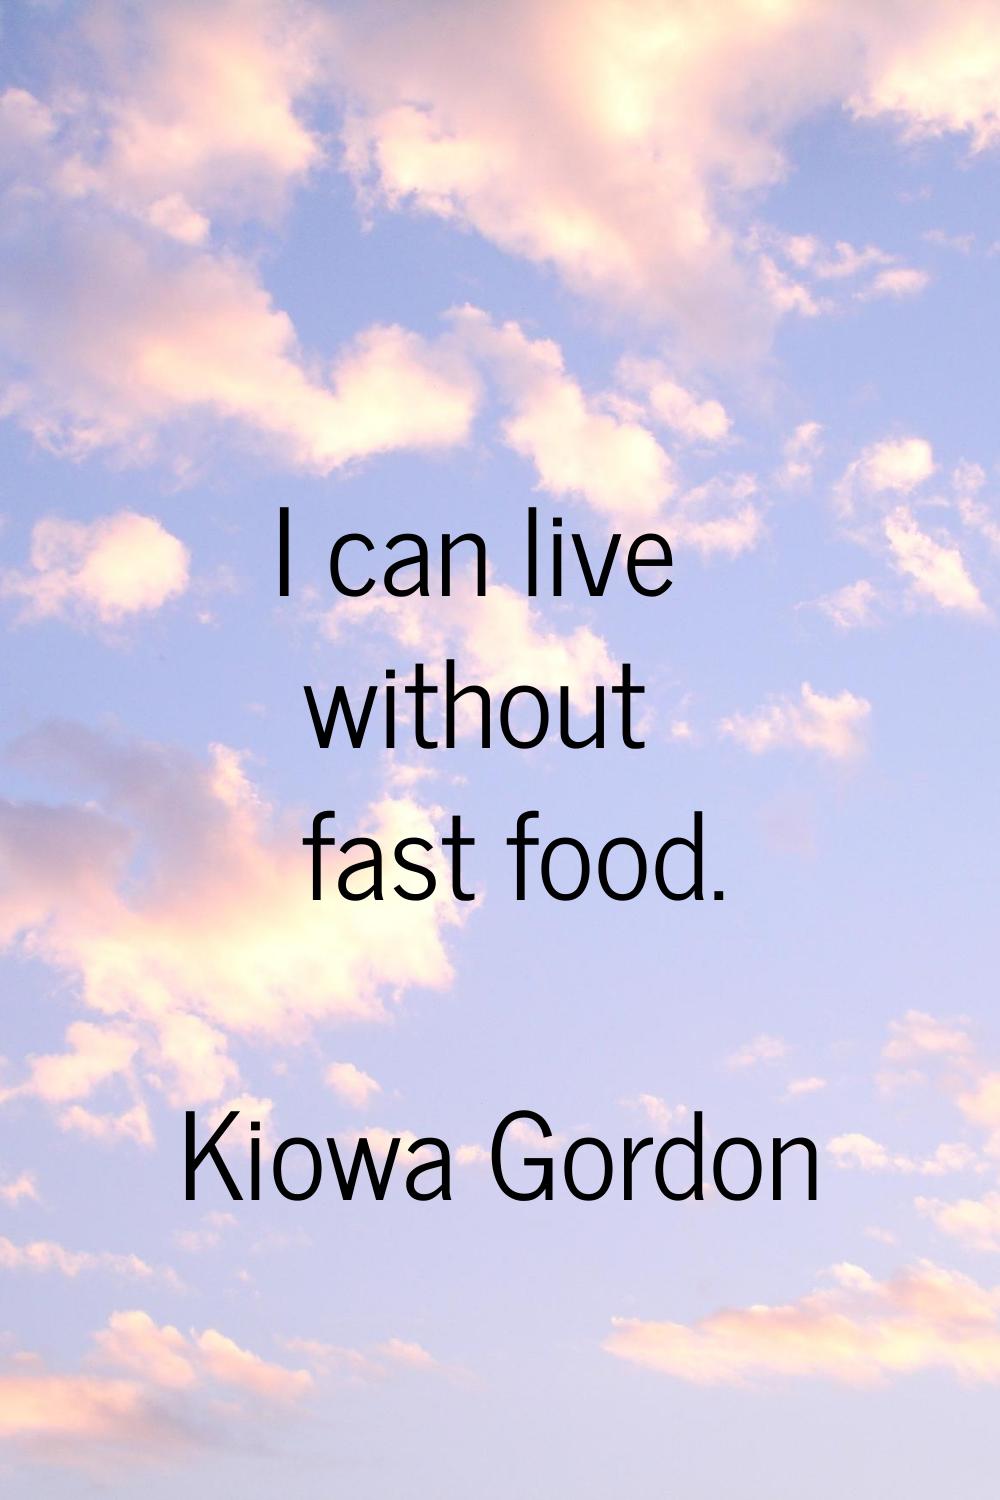 I can live without fast food.